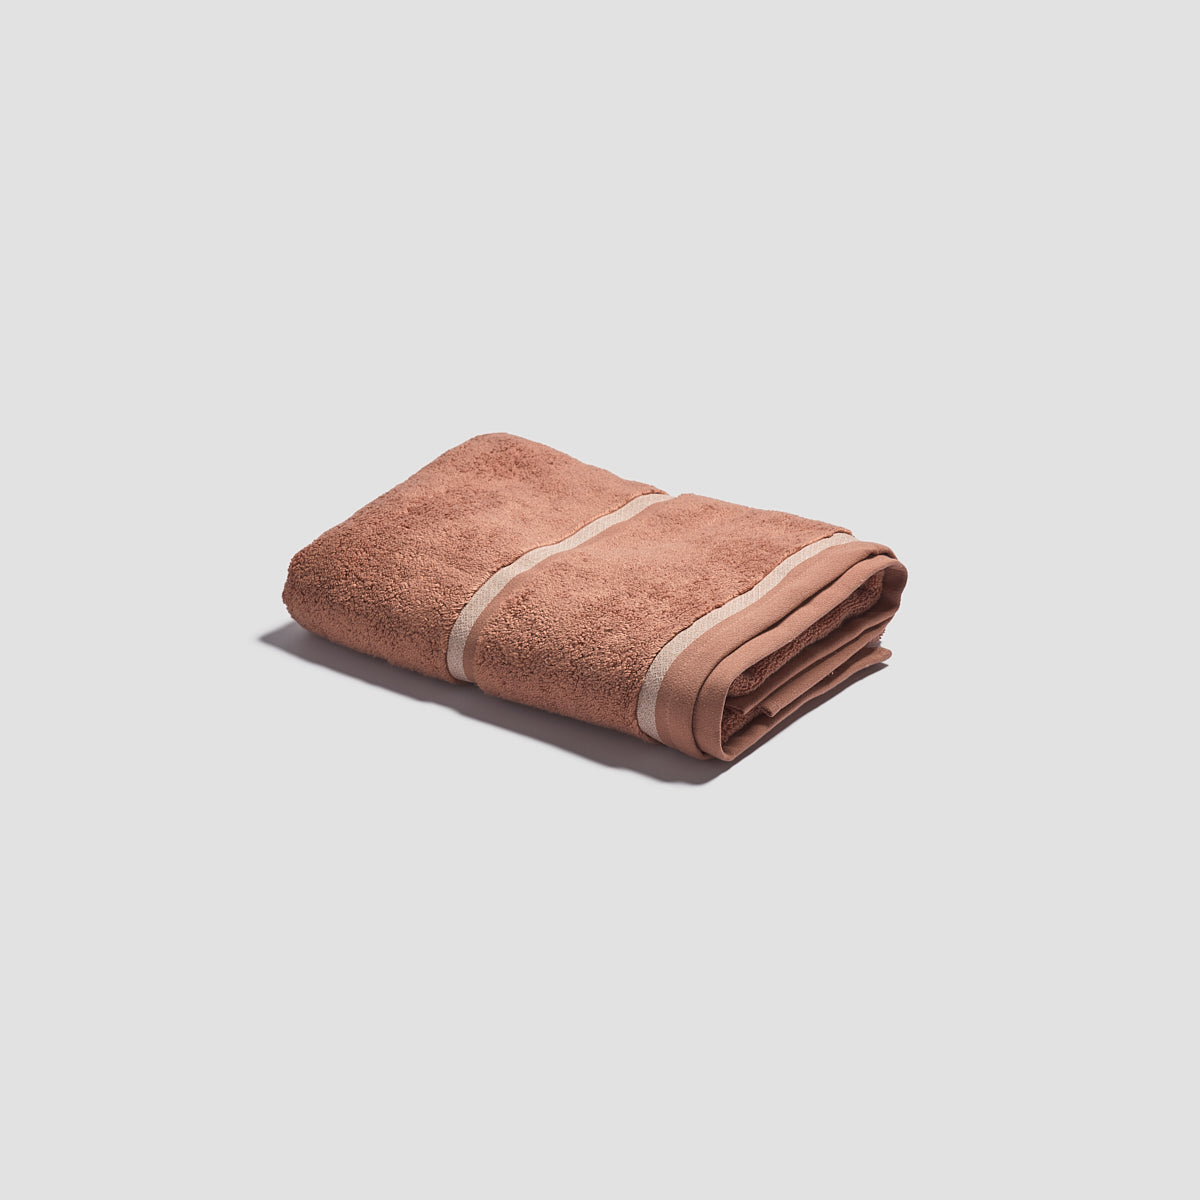 Warm Clay Cotton Towels Size Bath Towel by Piglet in Bed